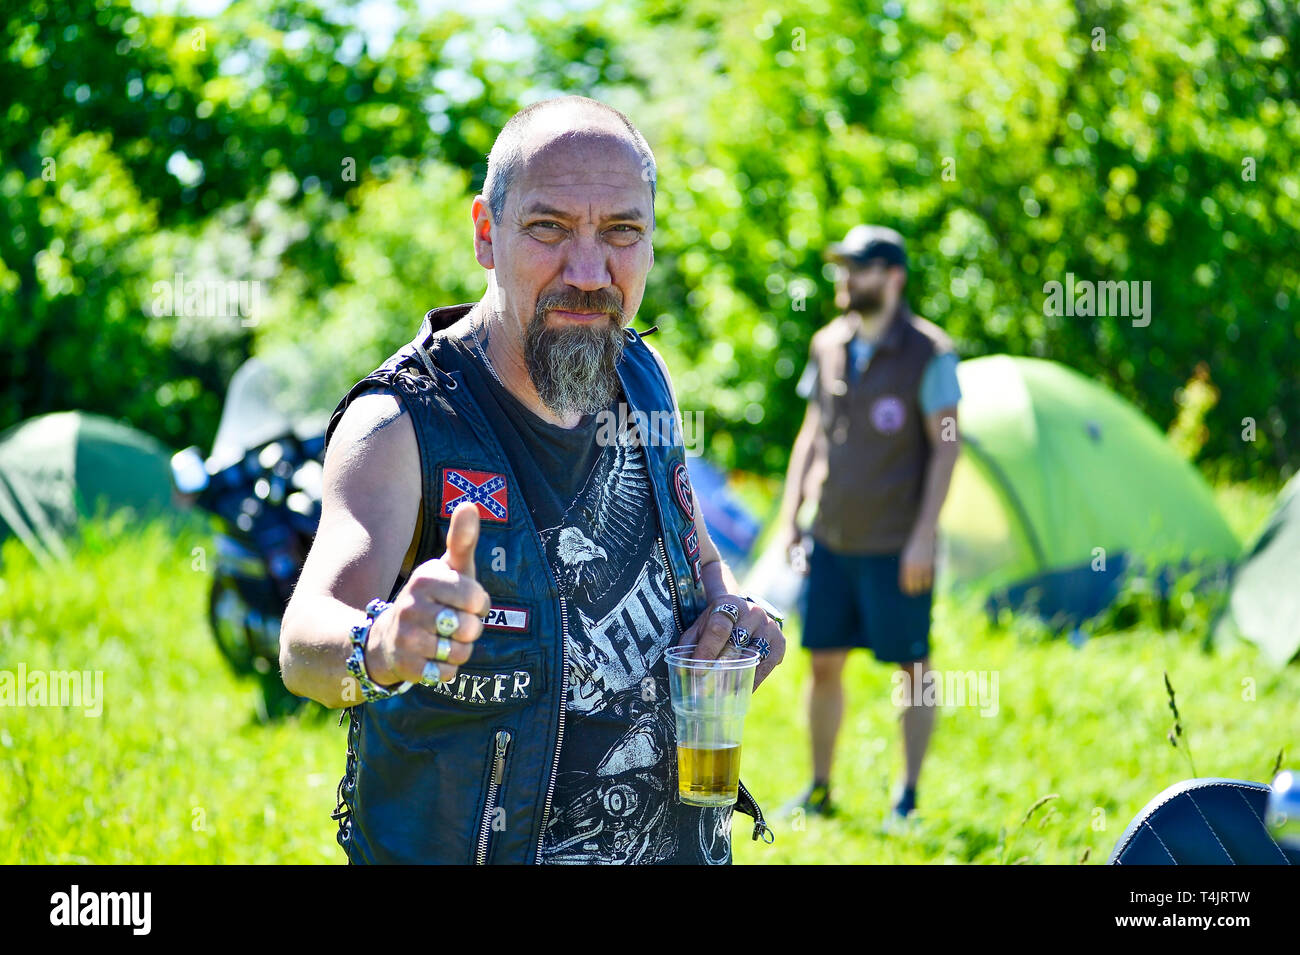 Man biker holding a glass of beer at the festival Meeting of summer Russia, Kursk region, Zheleznogorsk, may 2018. The concept of life on wheels. Stock Photo